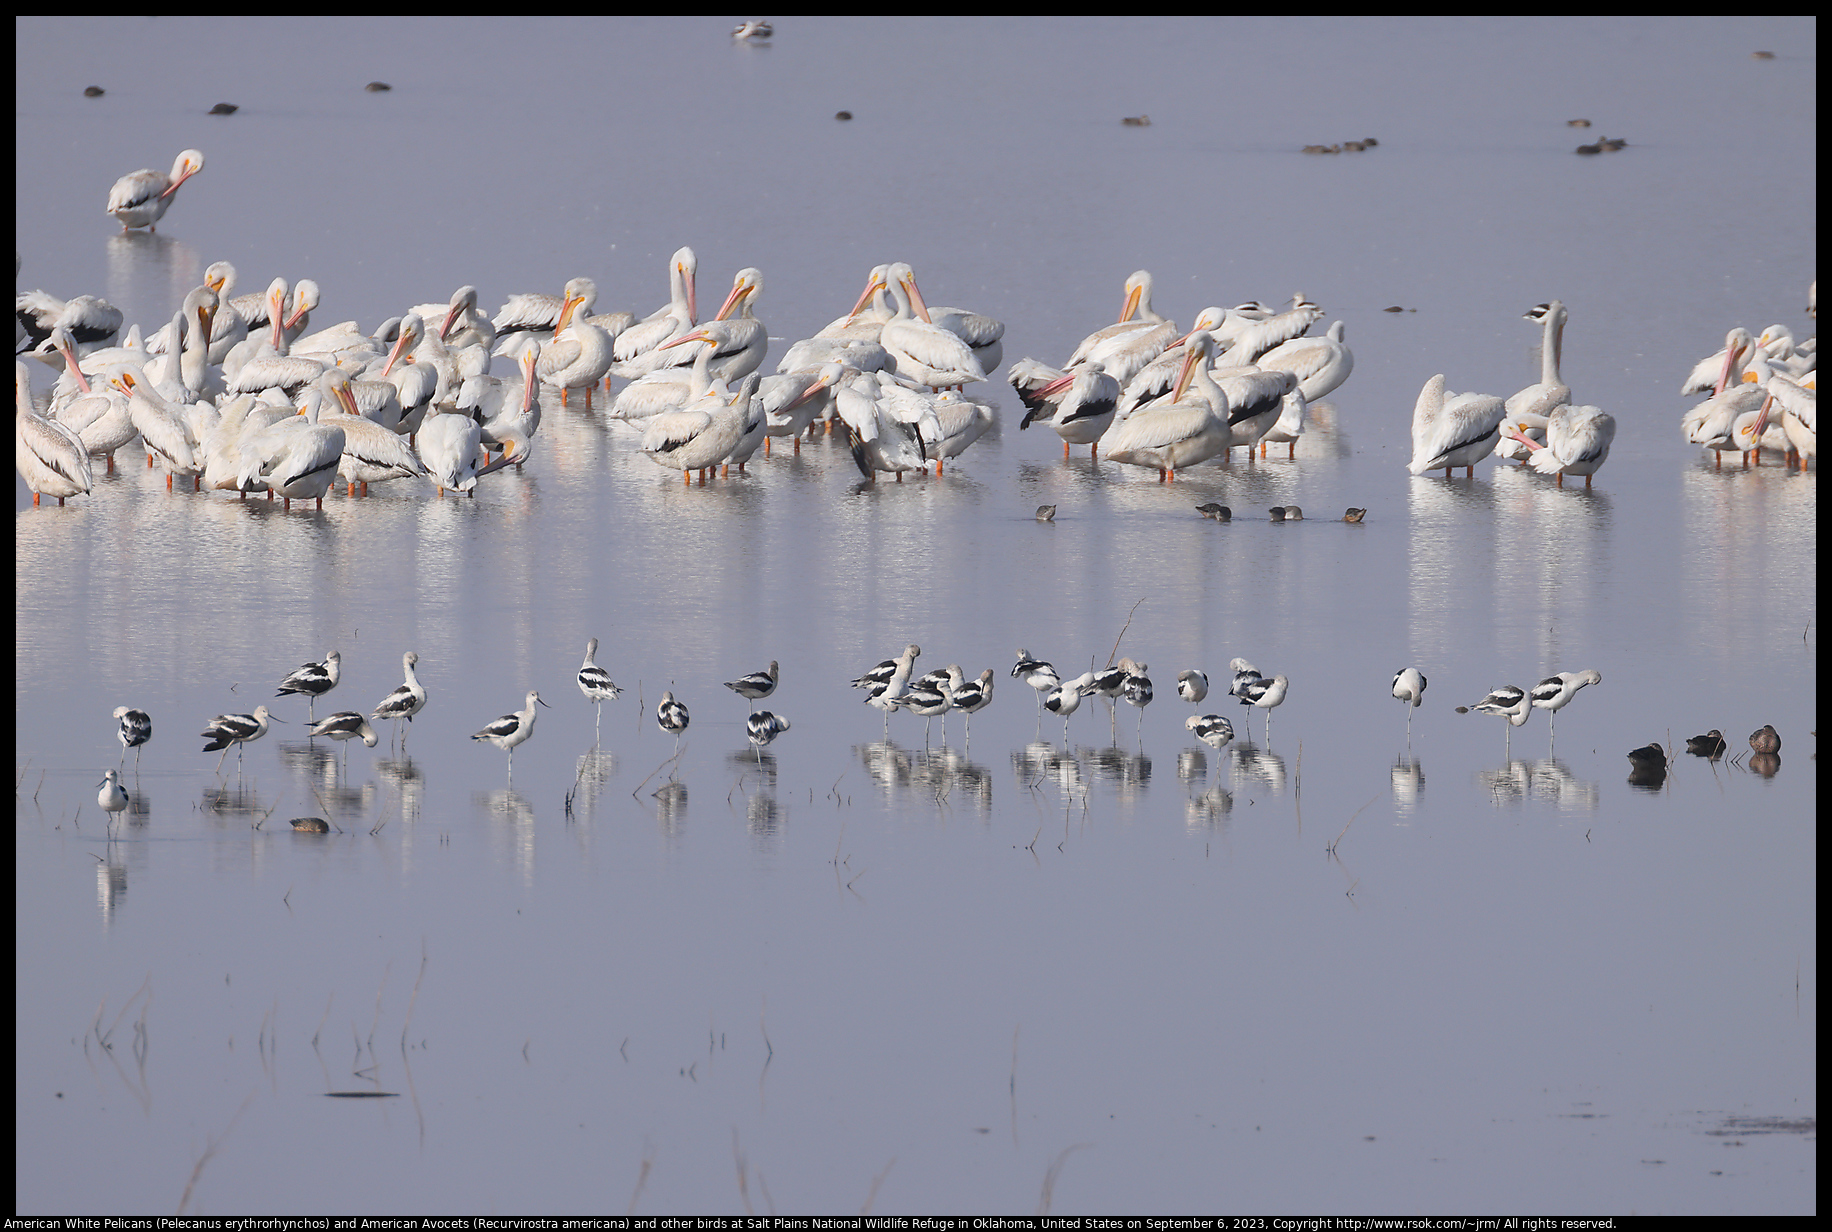 American White Pelicans (Pelecanus erythrorhynchos) and American Avocets (Recurvirostra americana) and other birds at Salt Plains National Wildlife Refuge in Oklahoma, United States on September 6, 2023